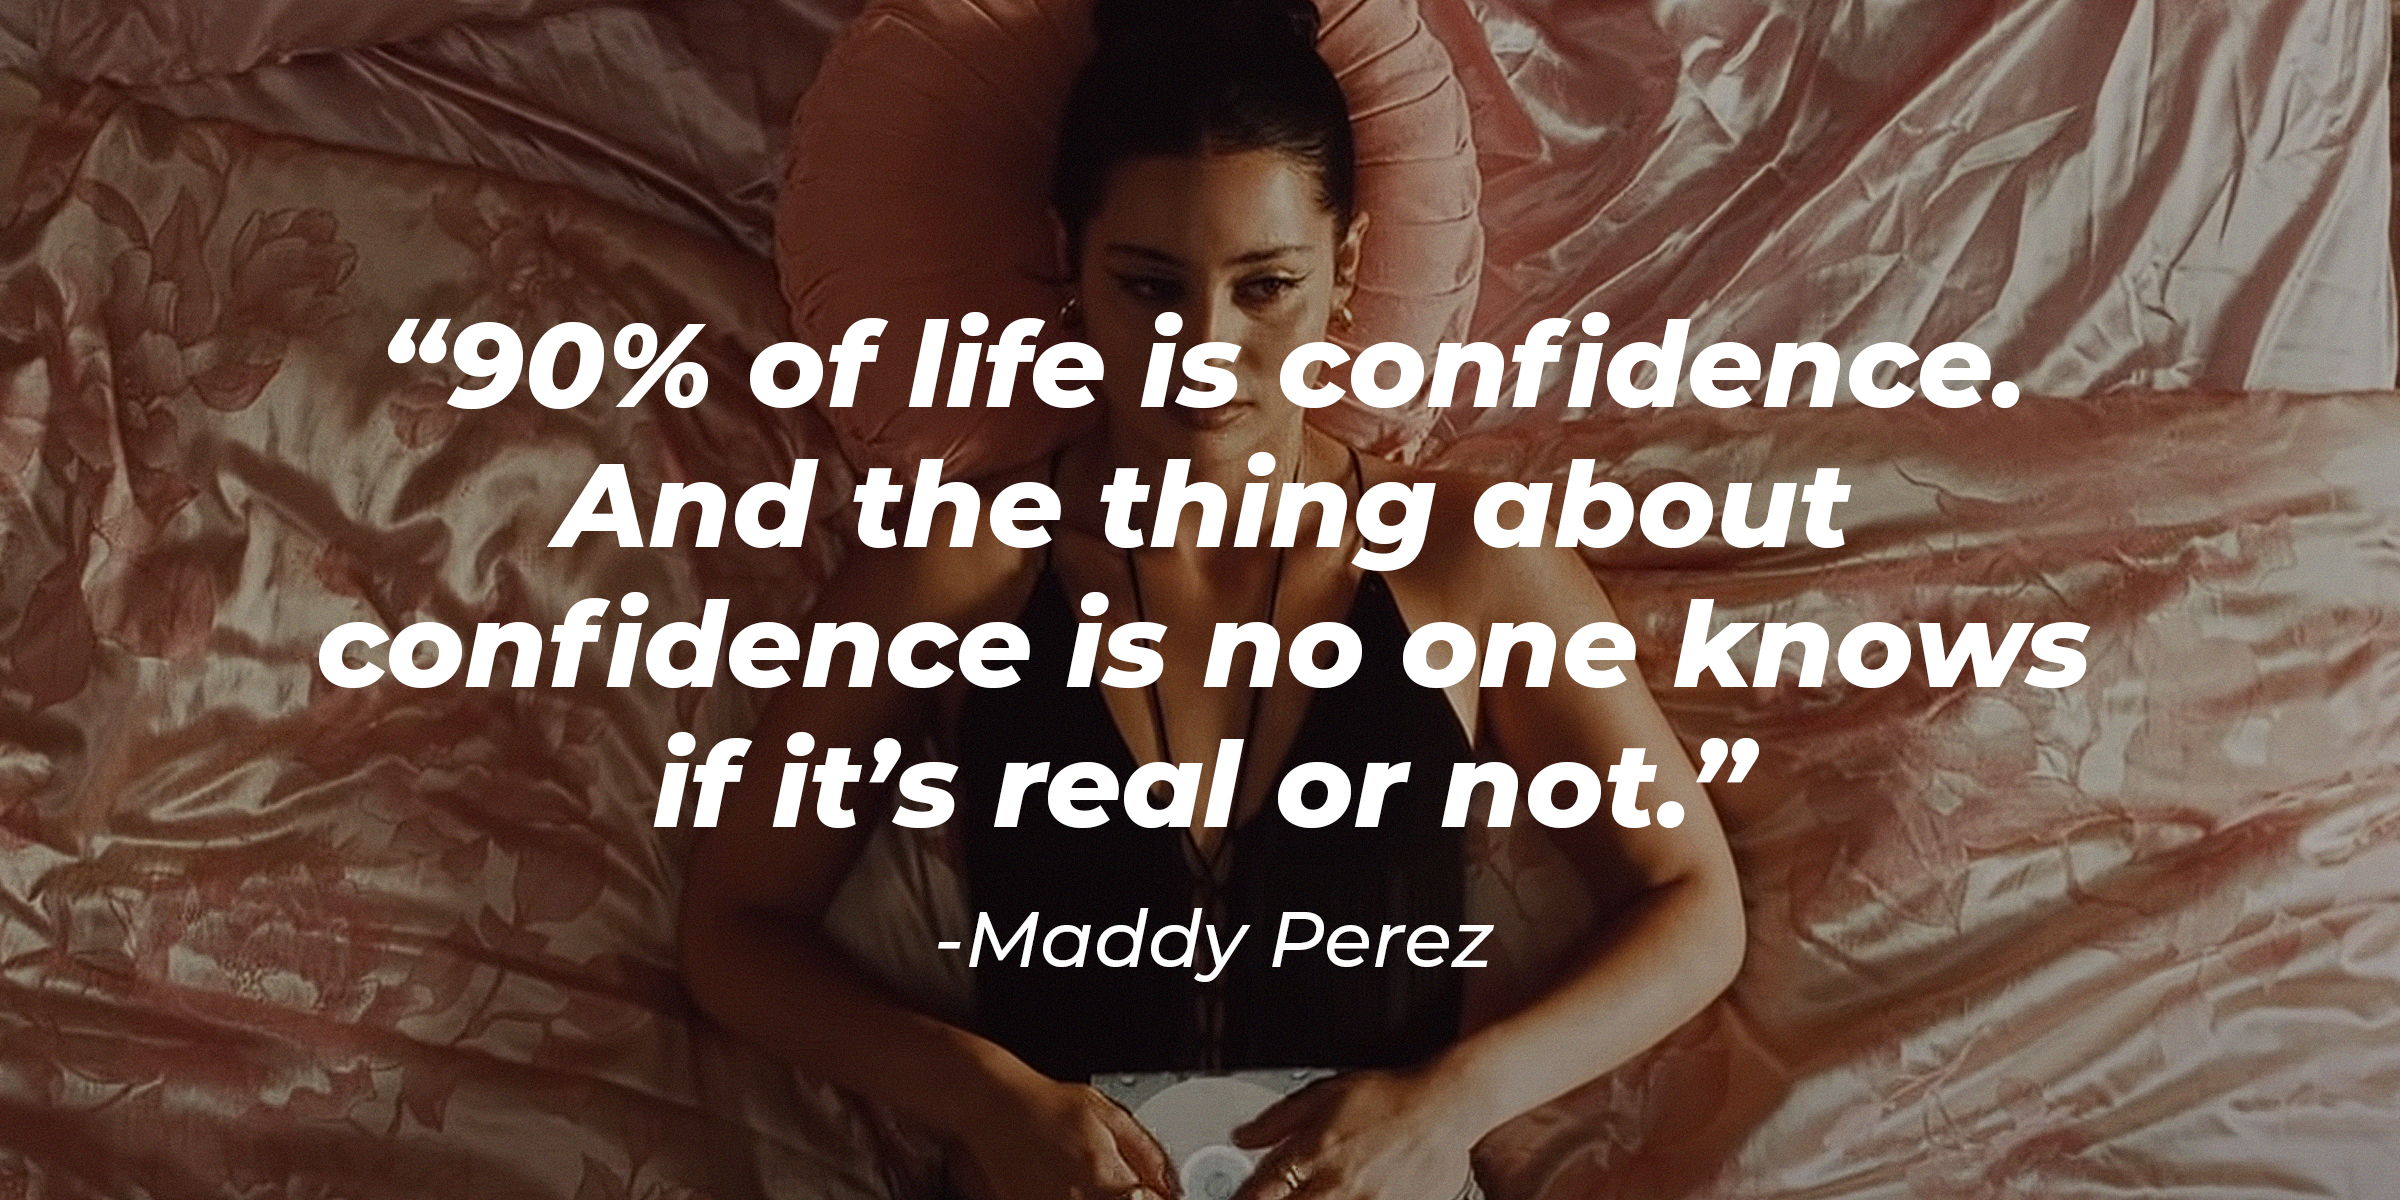 Maddy Perez, with her quote: “90% of life is confidence. And the thing about confidence is no one knows if it’s real or not.” | Source: youtube.com/EuphoriaHBO